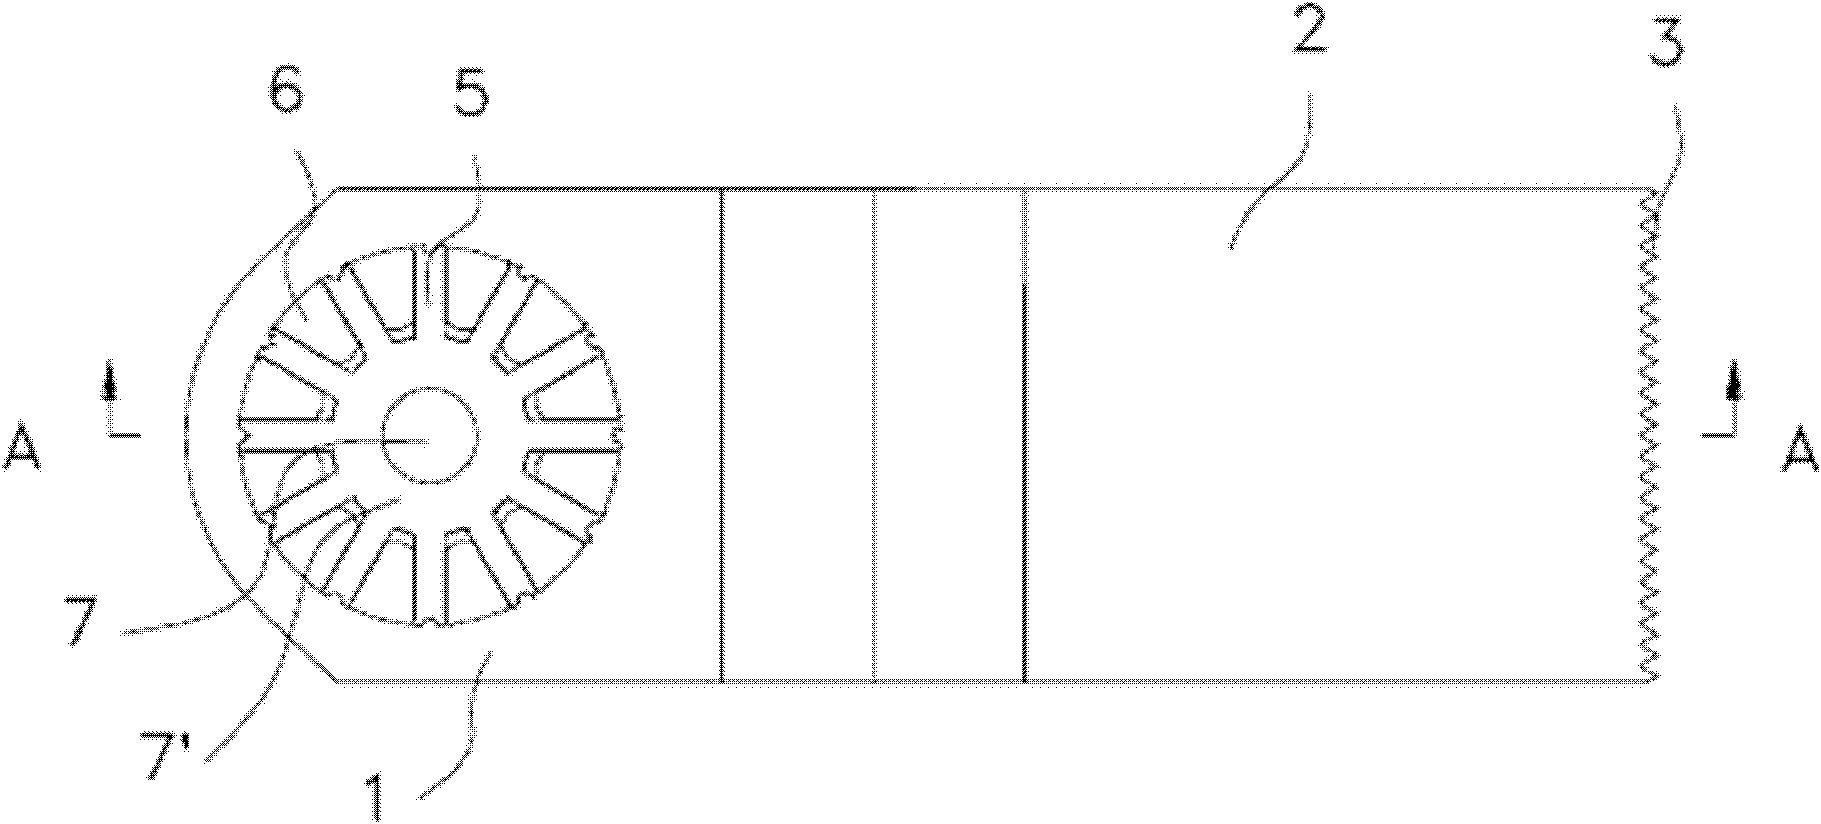 Working component capable of being fit with various shaft ends